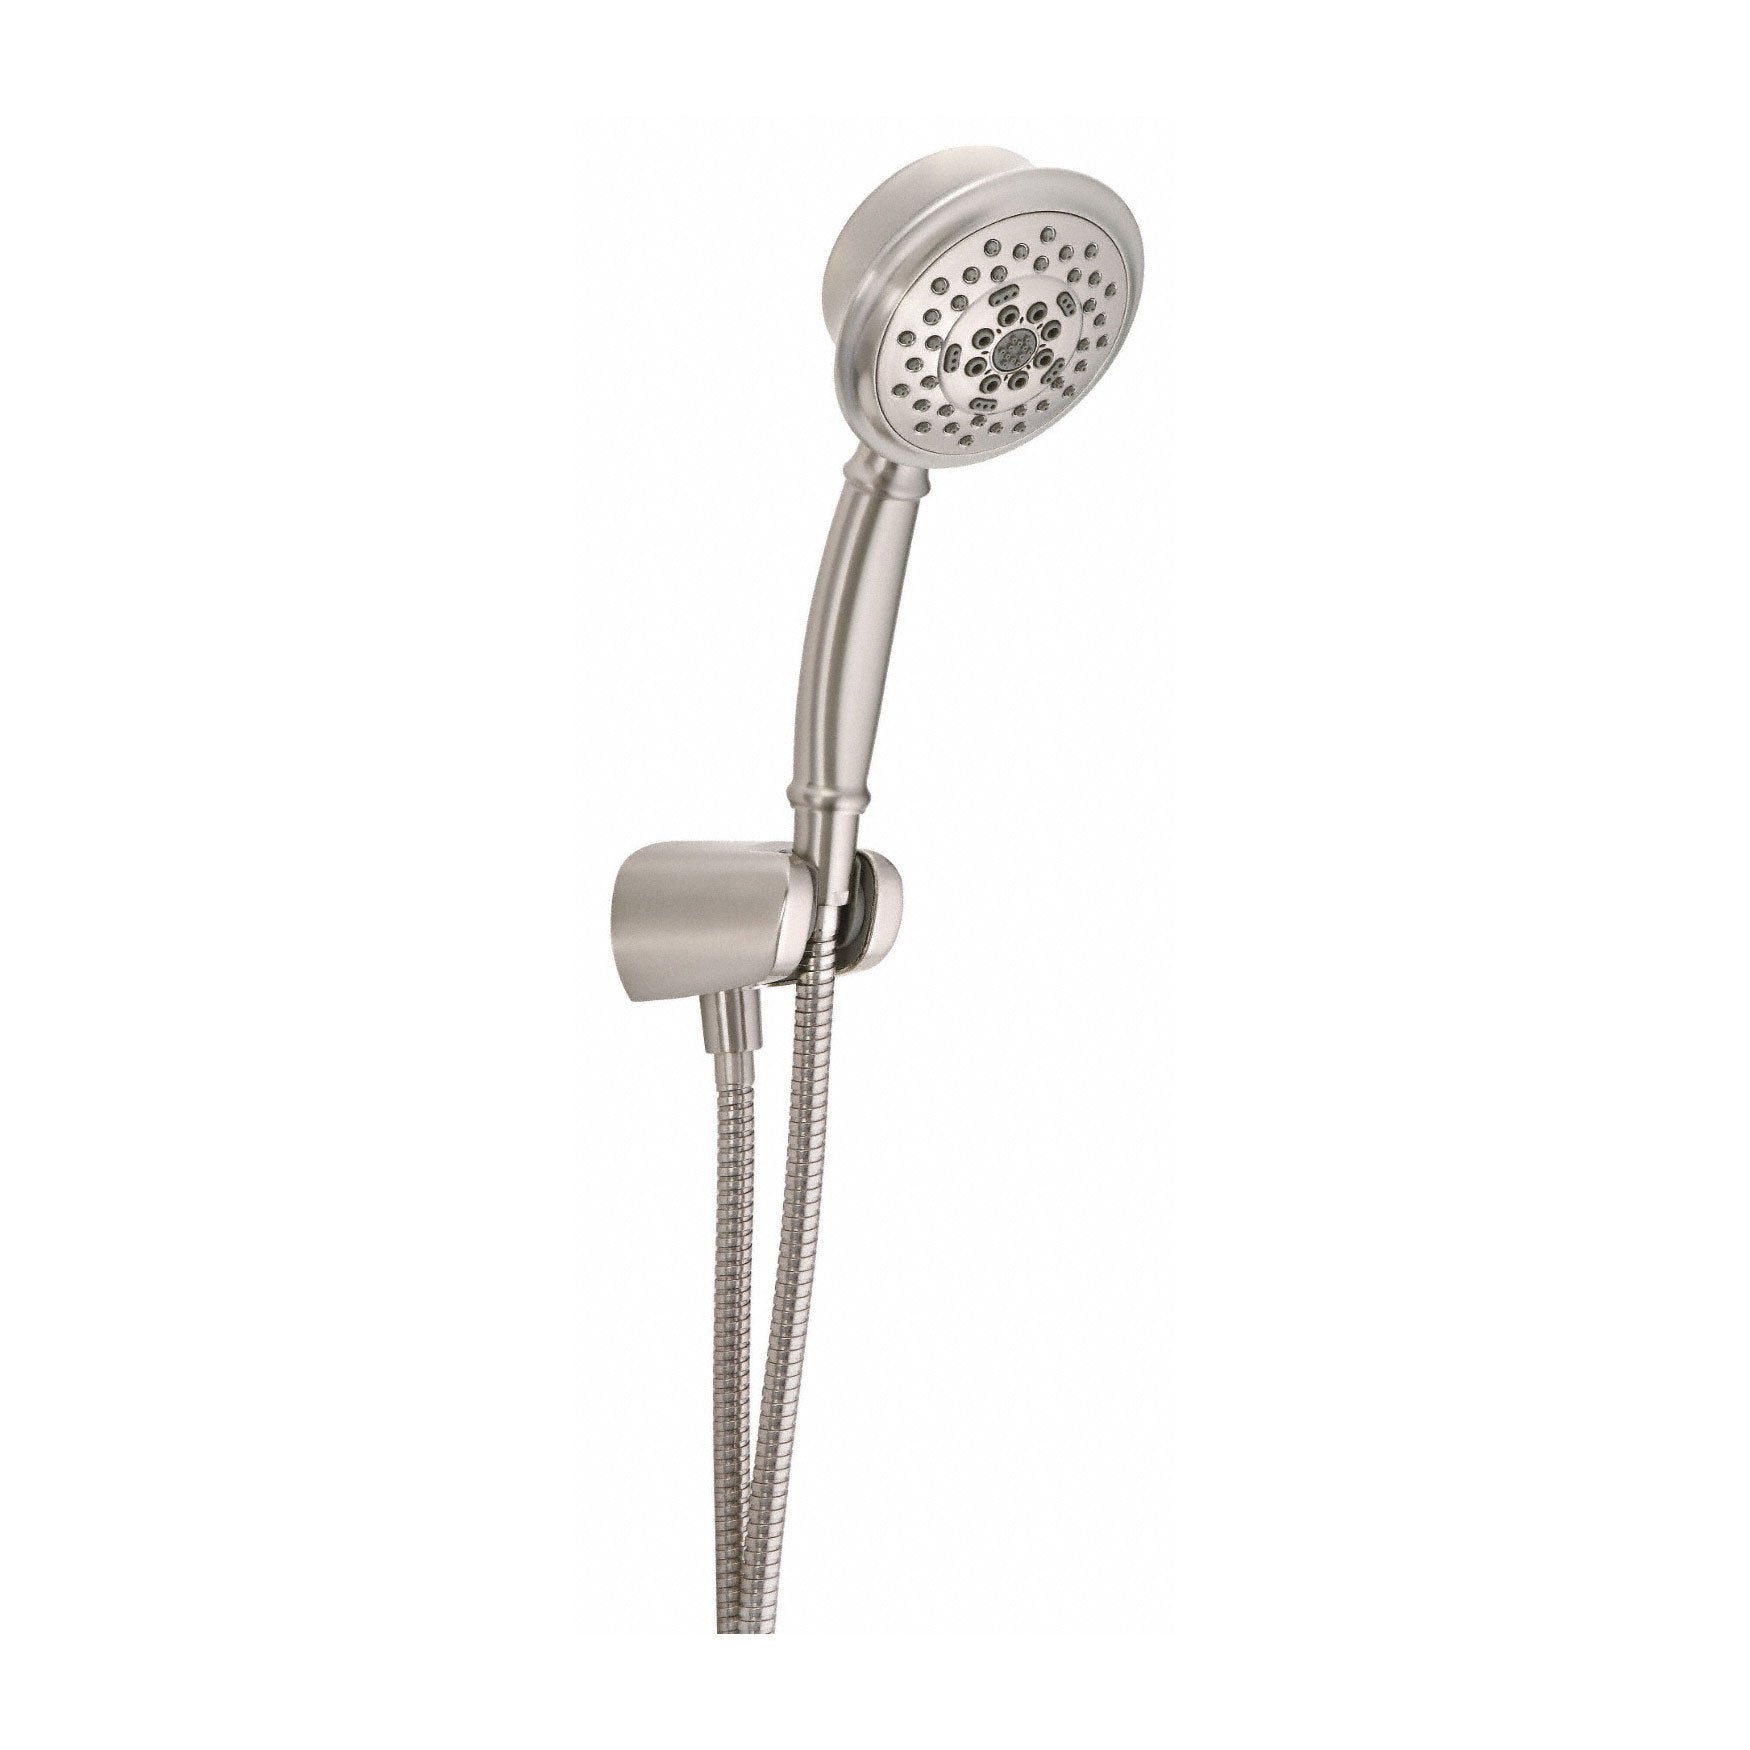 Danze Brushed Nickel Best Hand Held Shower Head with Hose and Mount Kit